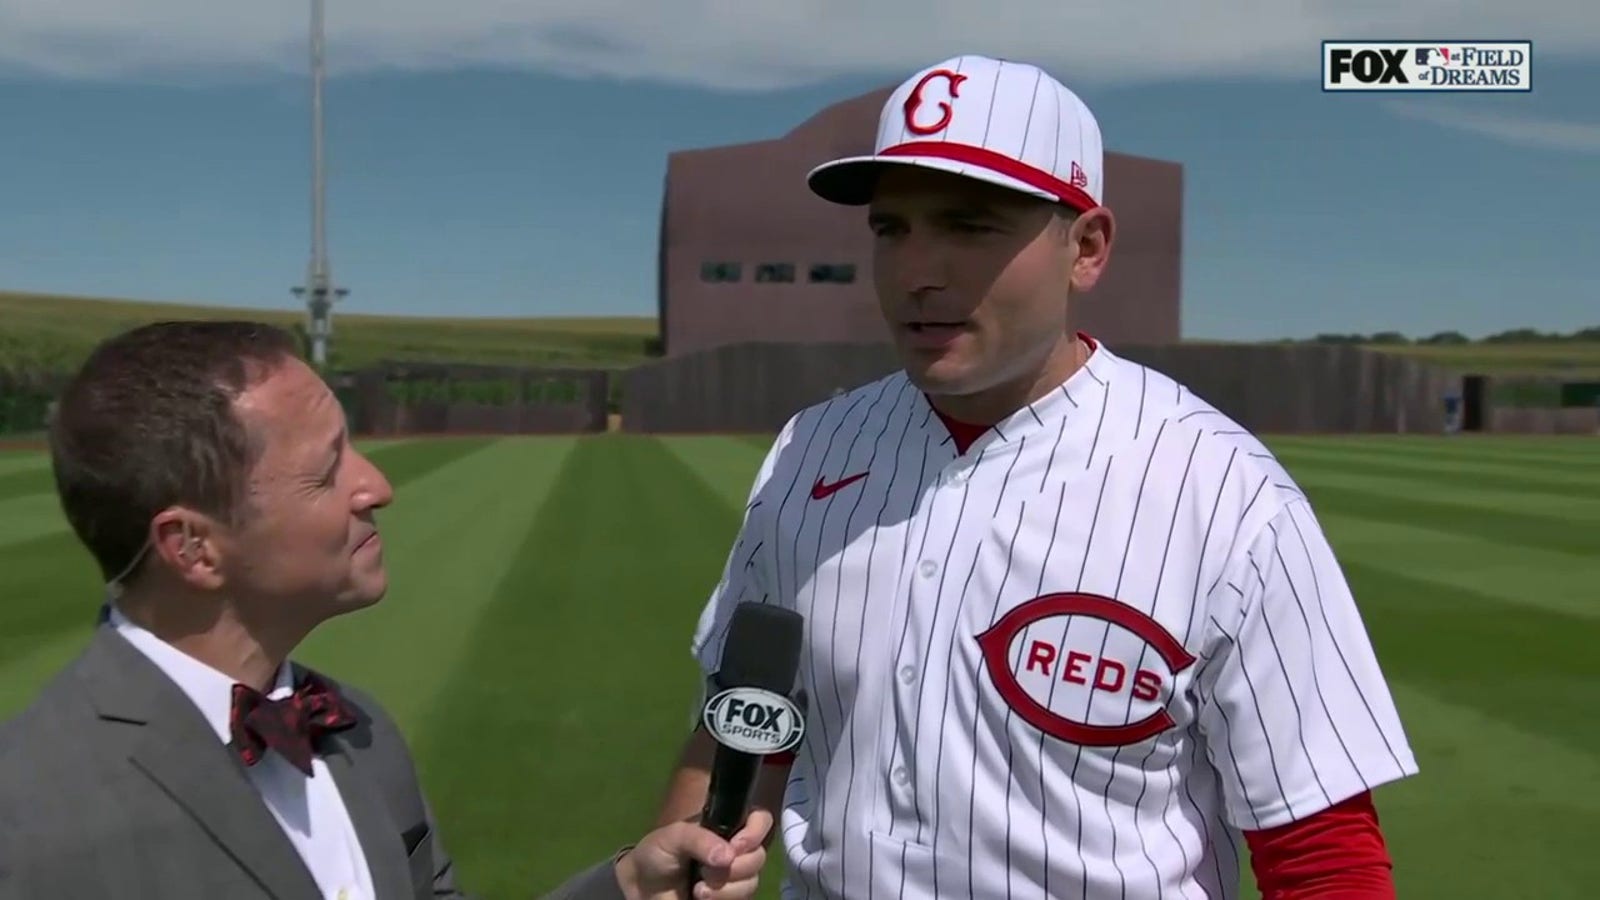 Joey Votto on watching 'Field of Dreams' with his late father and the chance to play in Iowa